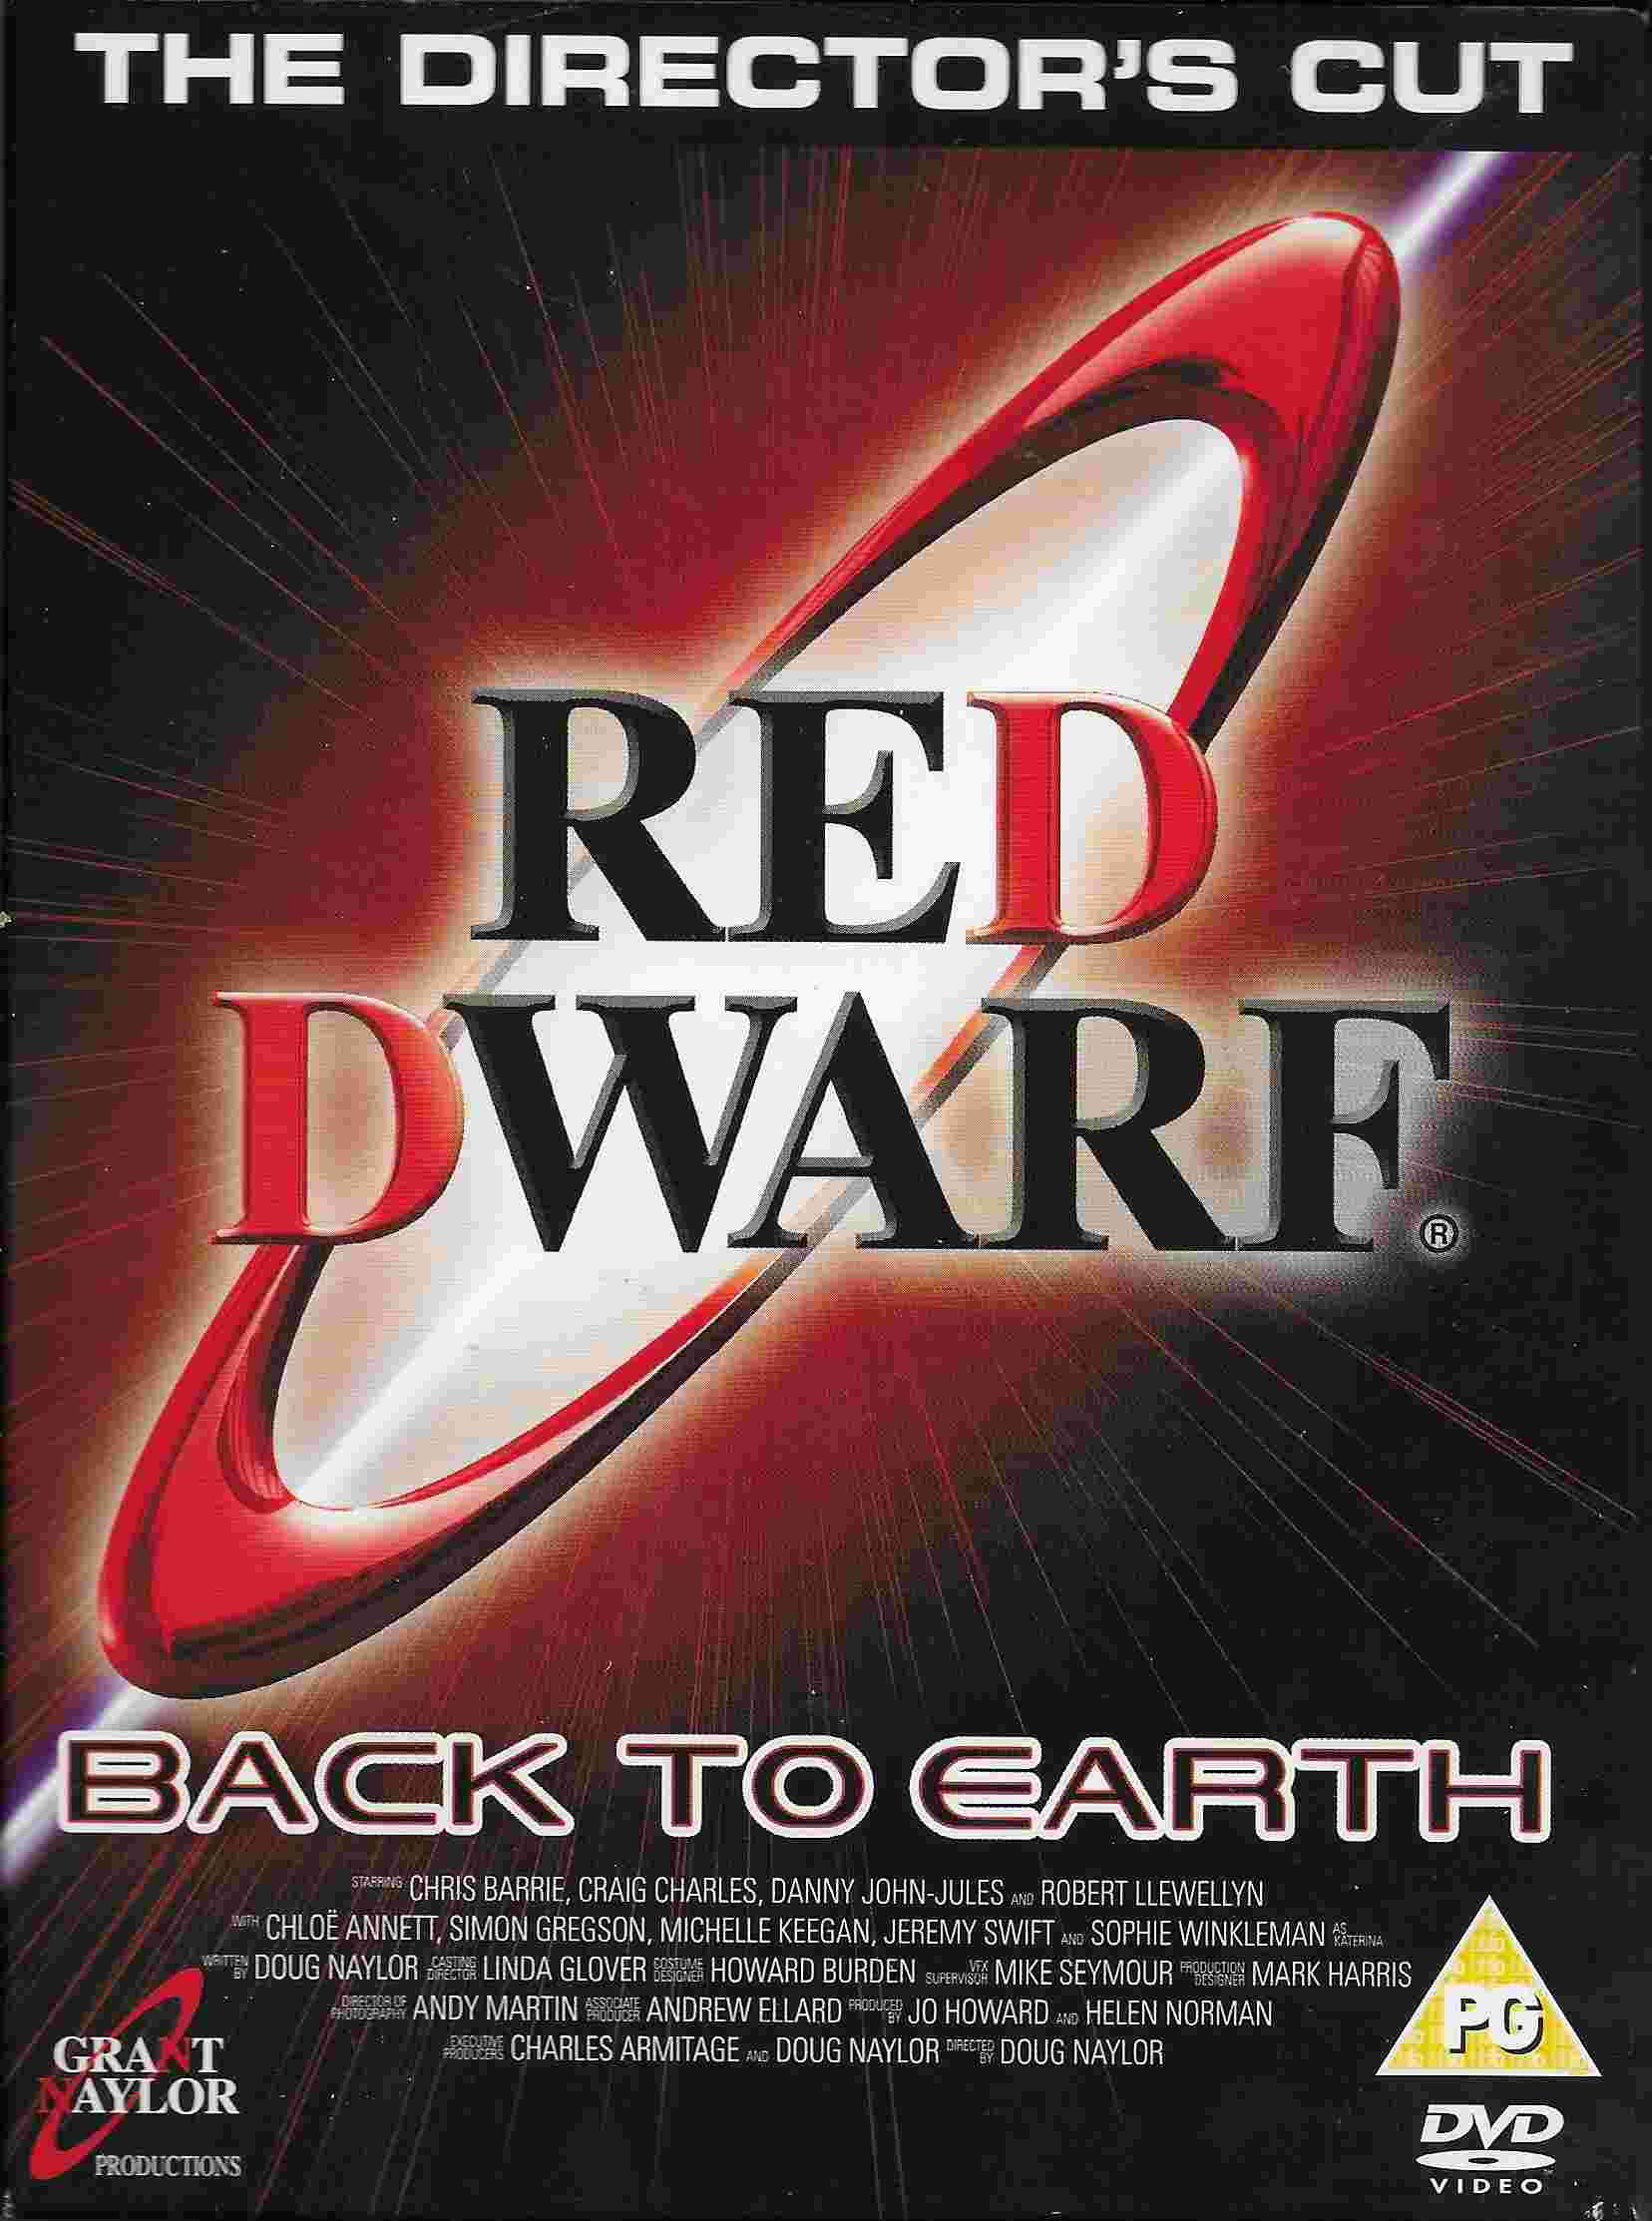 Picture of Red dwarf IX - Back to Earth by artist Doug Naylor from the BBC dvds - Records and Tapes library